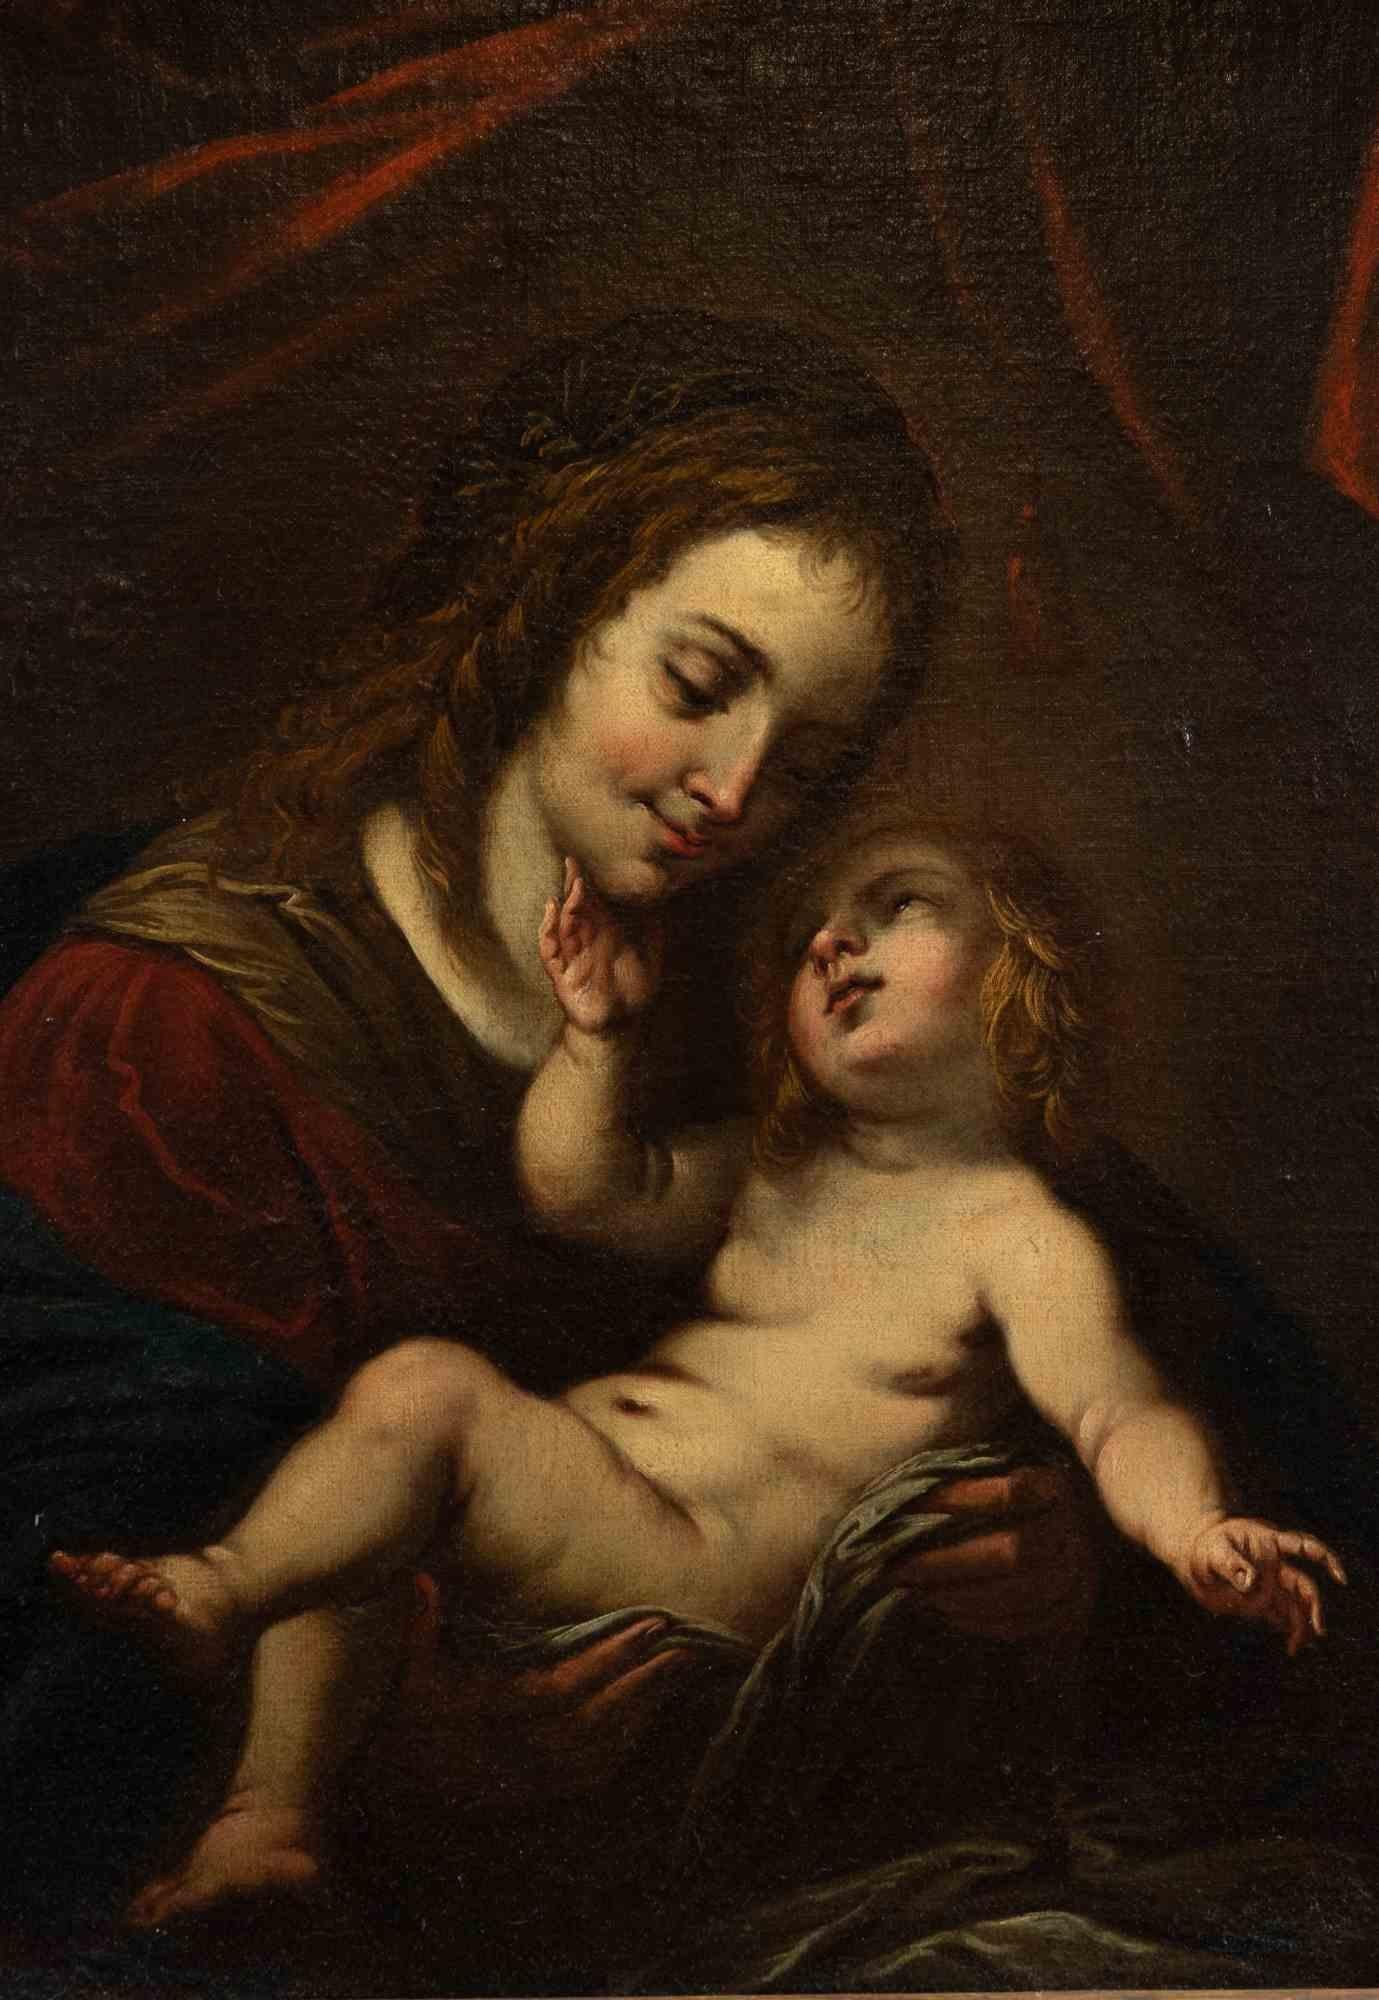 Virgin with Child - Painting by Theodor Mathon - 17th Century